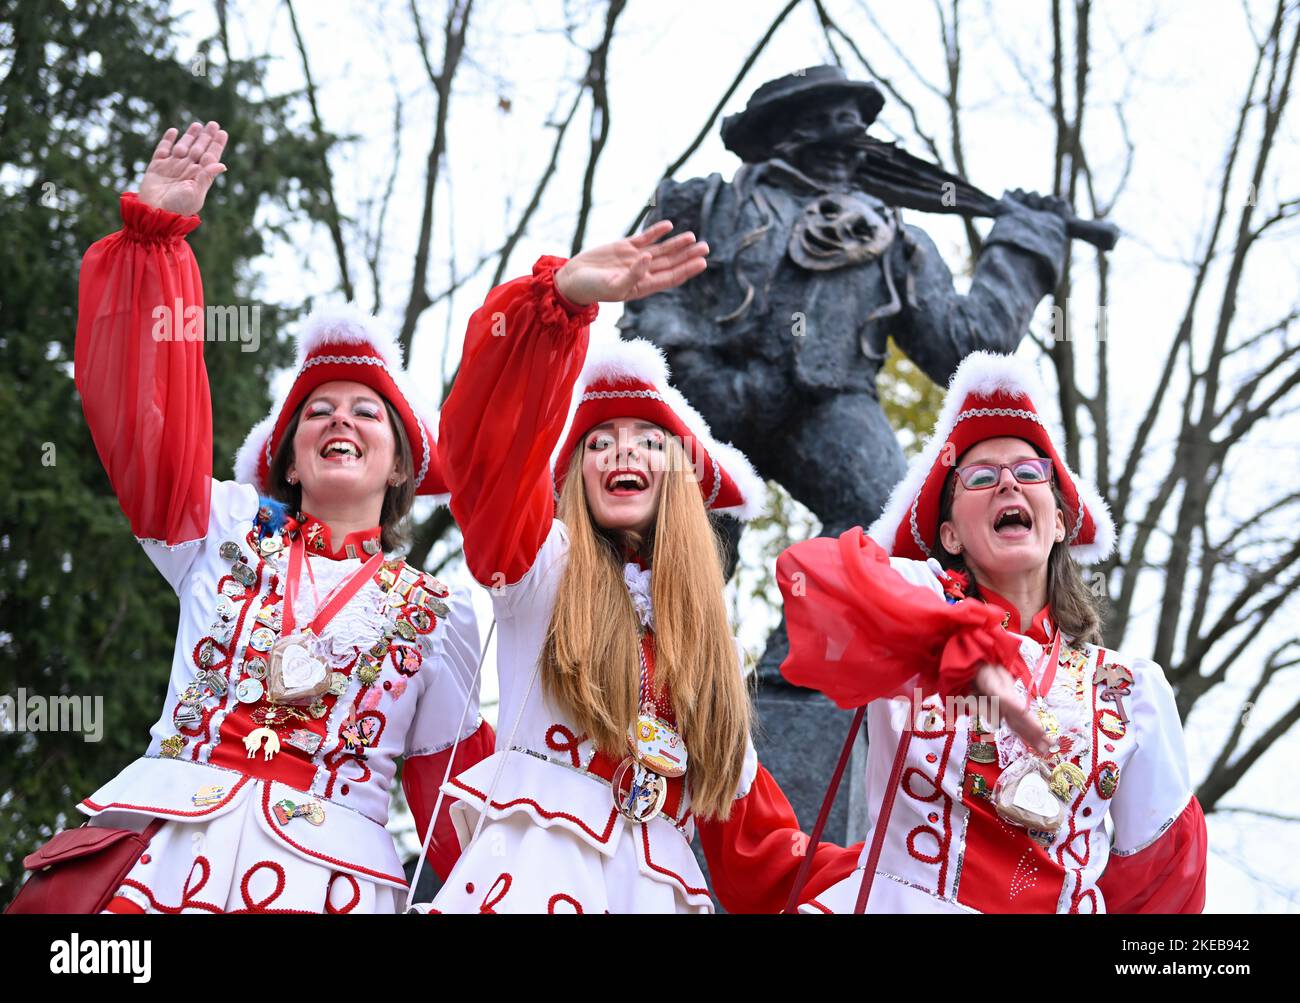 Hessen, Frankfurt/Main: 11 November 2022,  Lisa Retsch (l-r), Cyana Stojanovic and Anne-Lena Retsch from the KTC Rot-Weiß 1977 e.V. celebrate the return of their carnival symbol, the Urnarren, on 11.11 on H.P.-Müller-Platz in the Frankfurt district of Heddernheim, colloquially known as 'Klaa Paris'. The Urnarr is a gift from Lurgi AG for the 150th year of the Klaa Paris carnival and has stood at the subway station since 1989. It was dismantled a few weeks ago for repair and cleaning. Photo: Arne Dedert/dpa Stock Photo